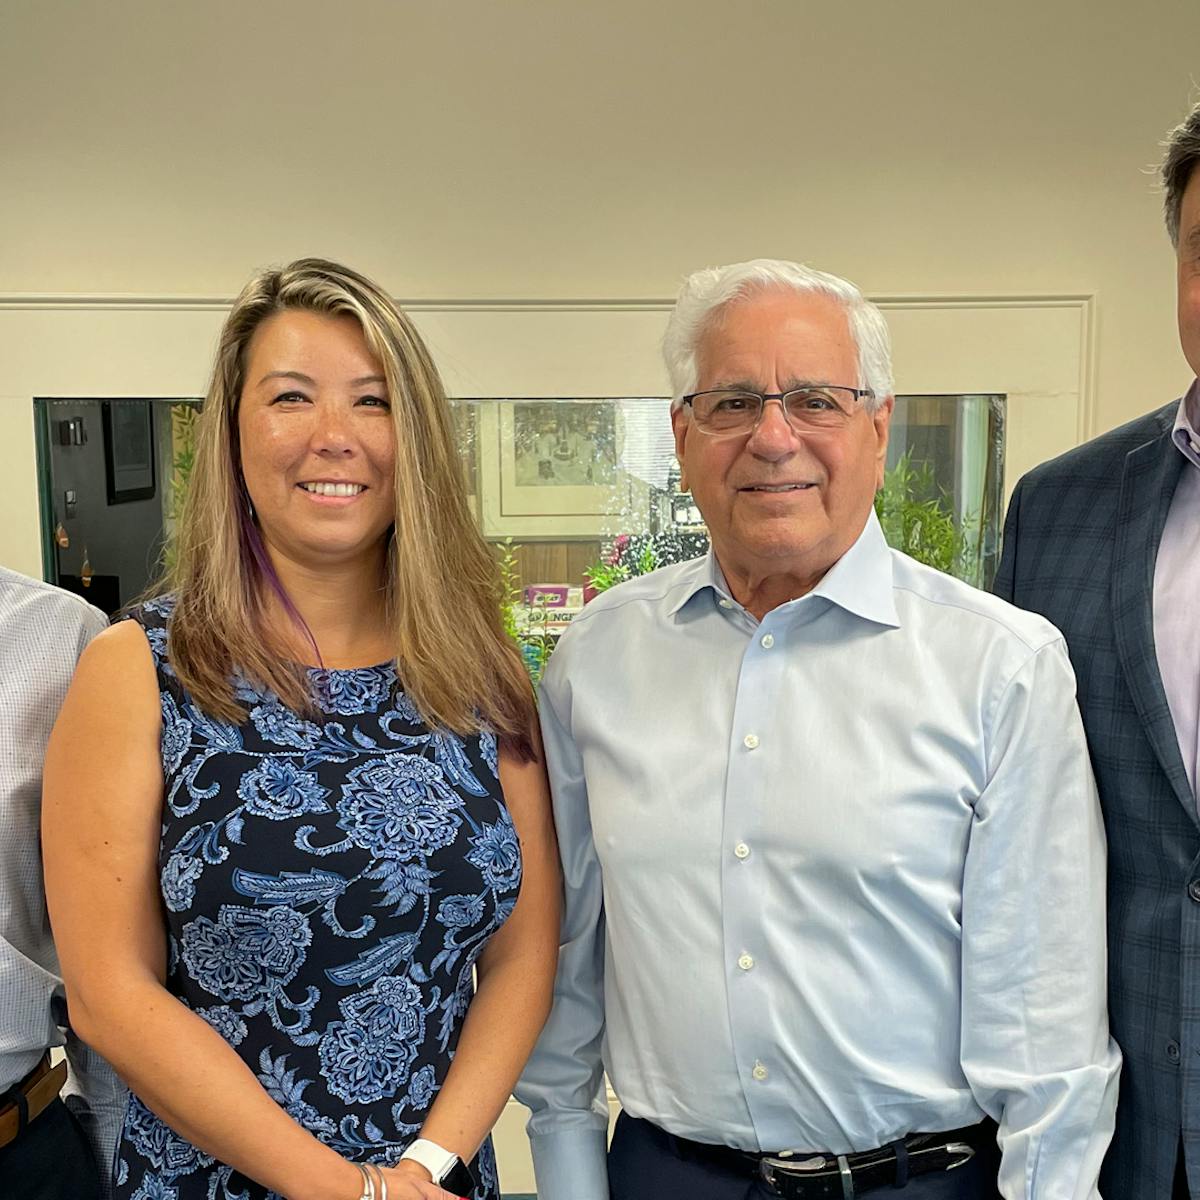 Pictured, from left, are American Food and Vending&rsquo;s COO Jim Roselando Jr., office manager Maria Foresteire, founder and president Jim Roselando Sr. and vice president Patrick Arone.